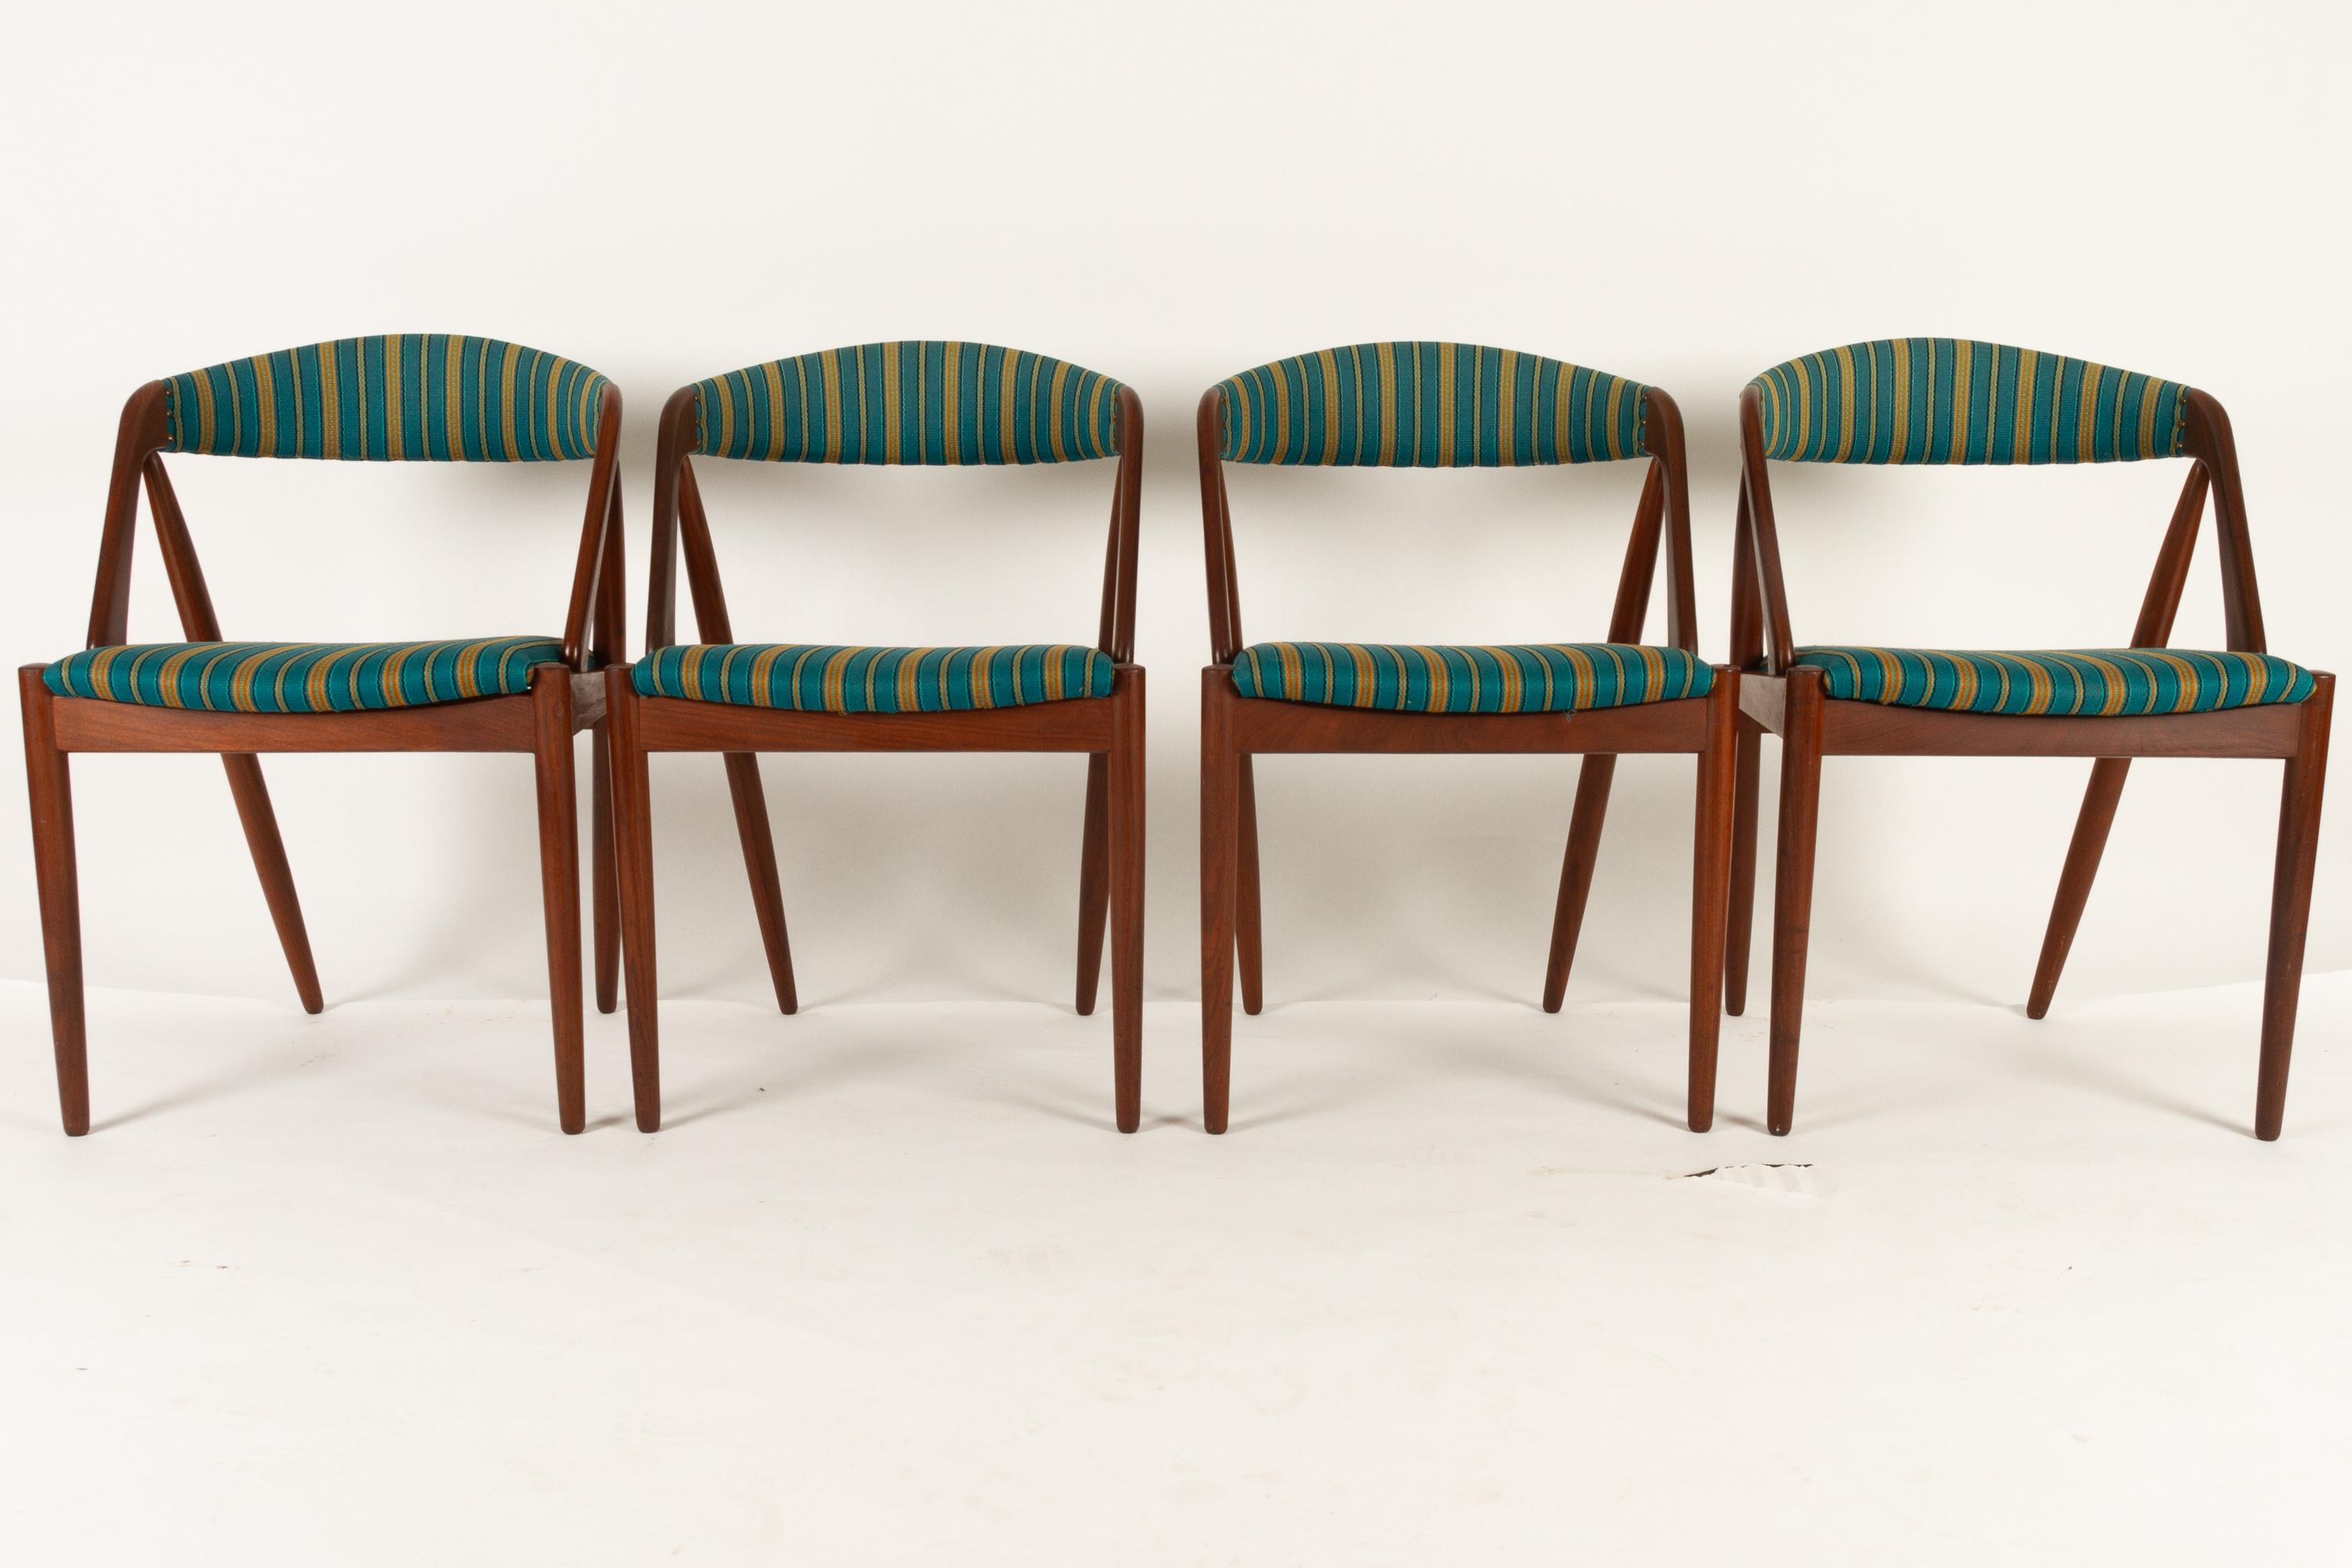 Danish teak dining chairs by Kai Kristiansen for Schou Andersen 1960s set of 4.
Beautiful set of Mid-Century Modern dining chair in solid teak. Round tapered legs. Large curved backrests. And slanting armrests. Many beautiful joints, performed with